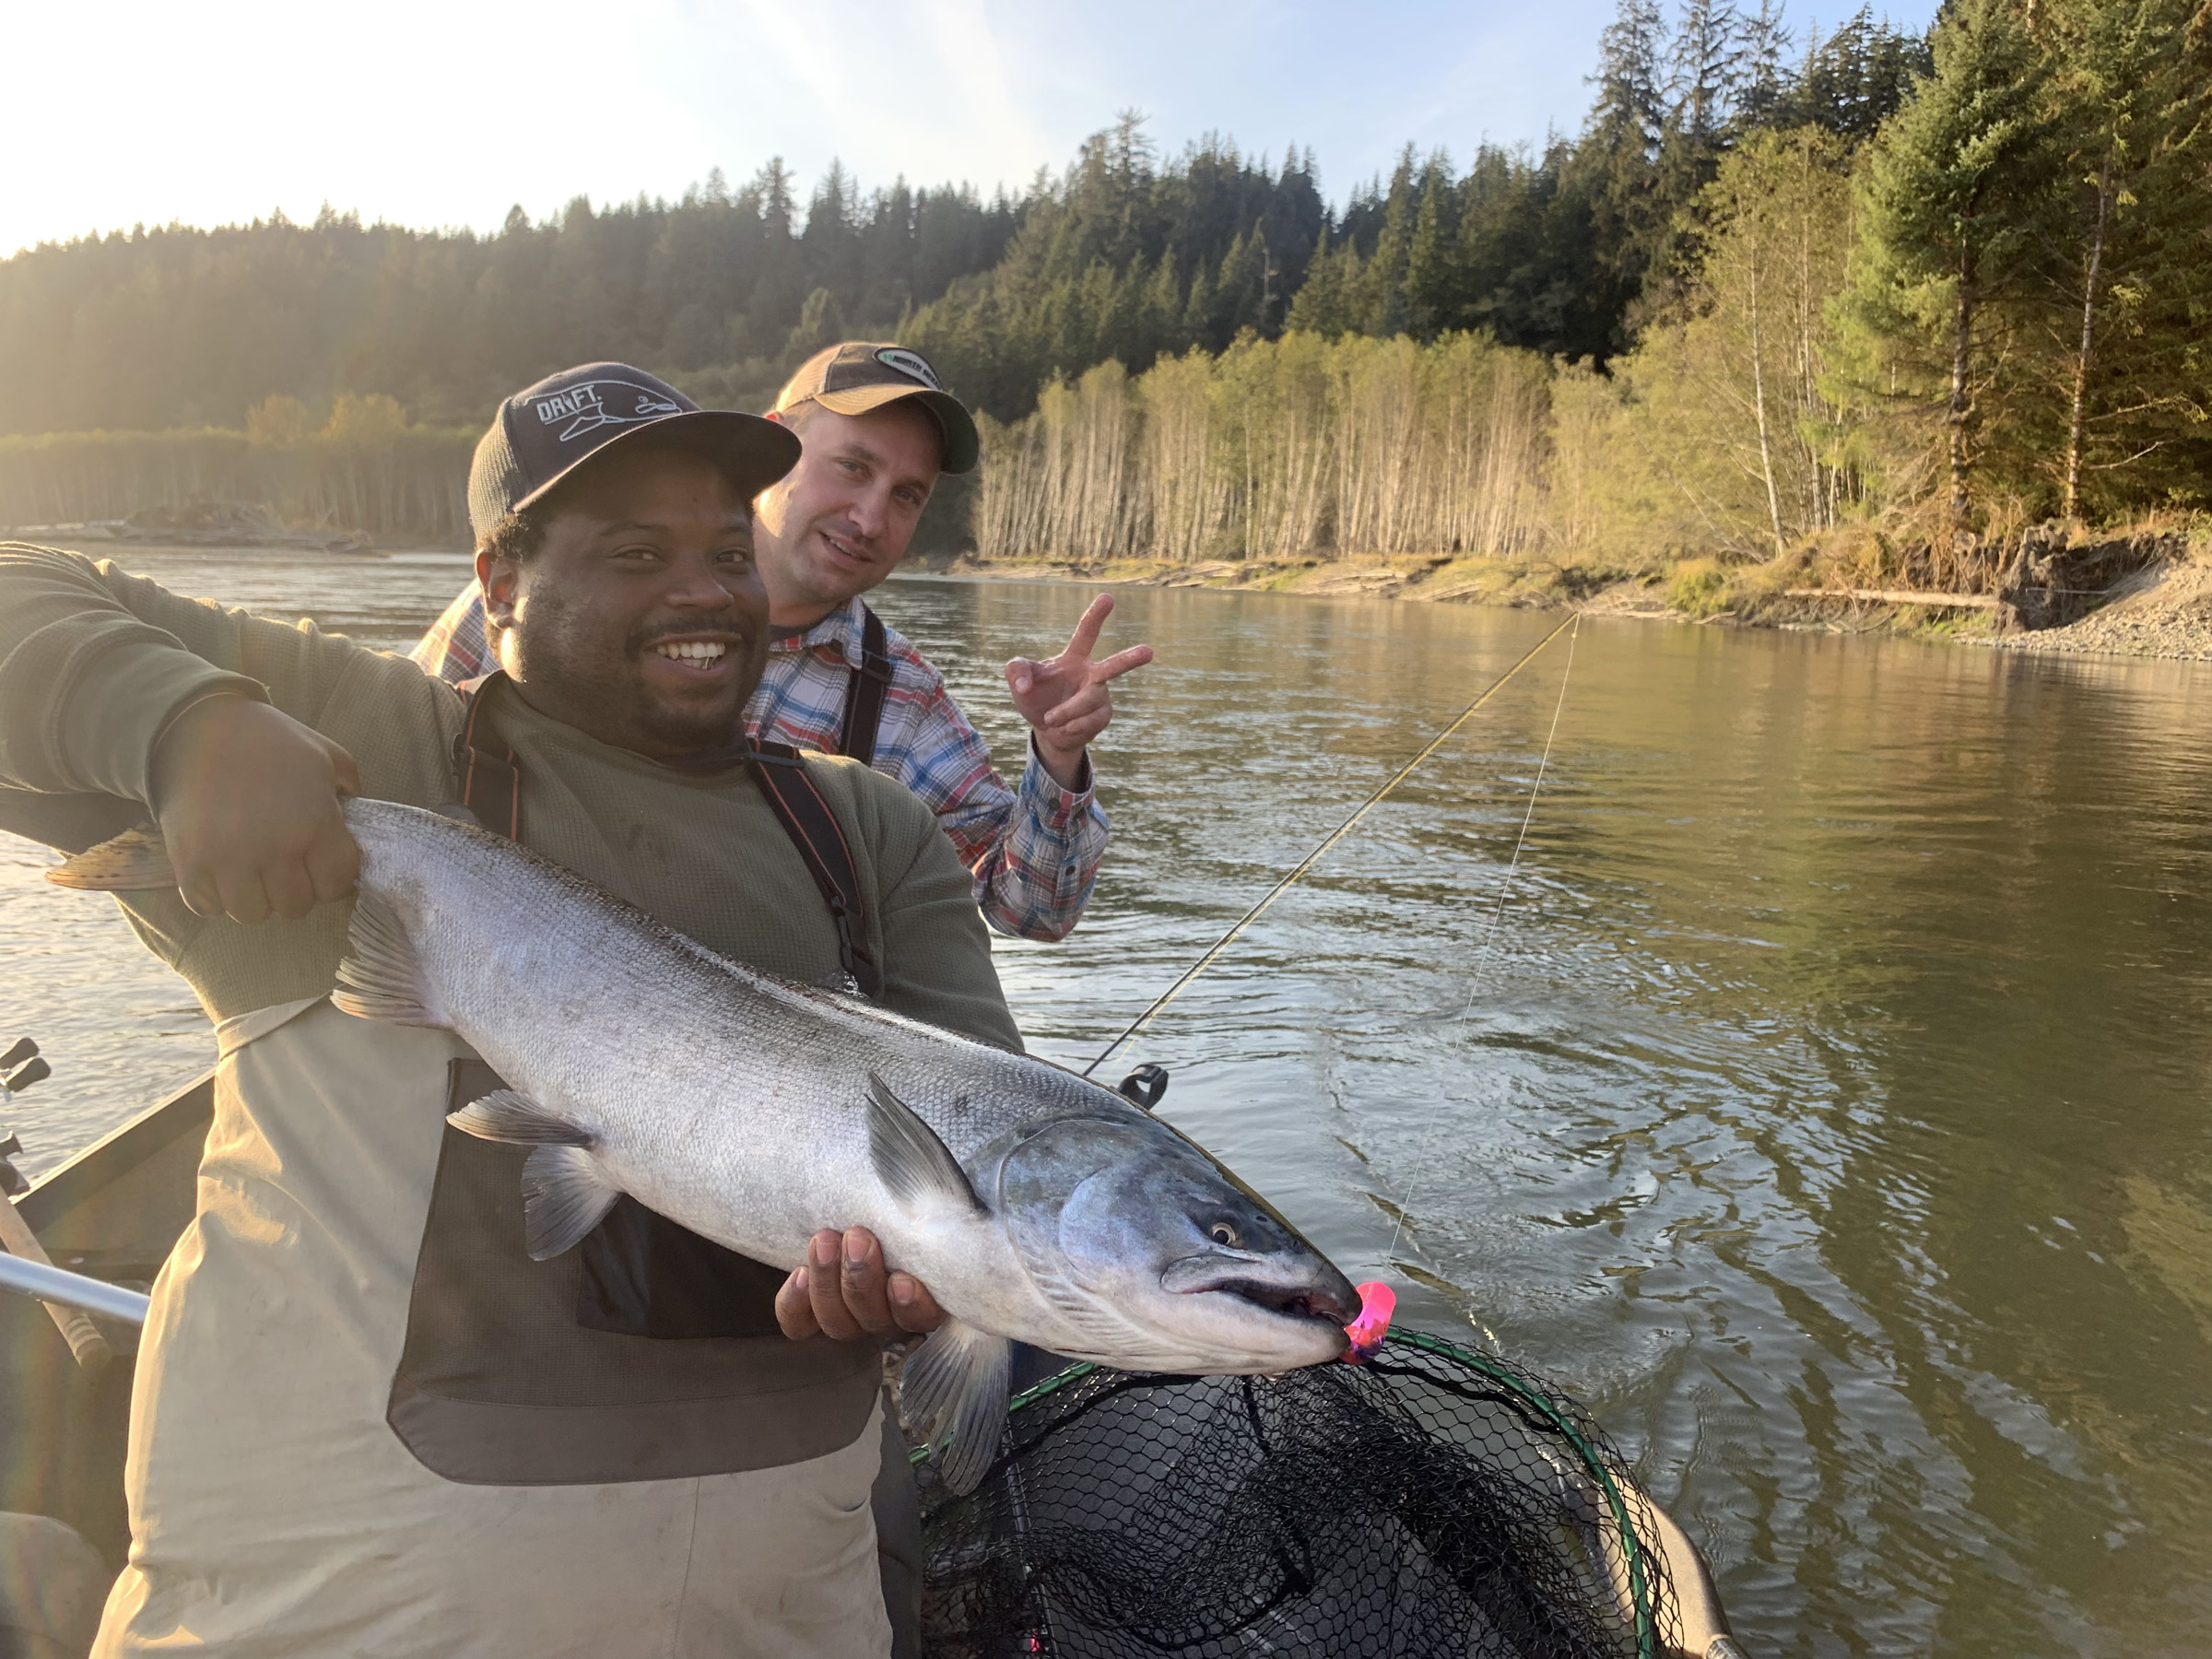 https://riptidefish.com/wp-content/uploads/2019/10/queets-river-chinook-salmon-fishing.jpg